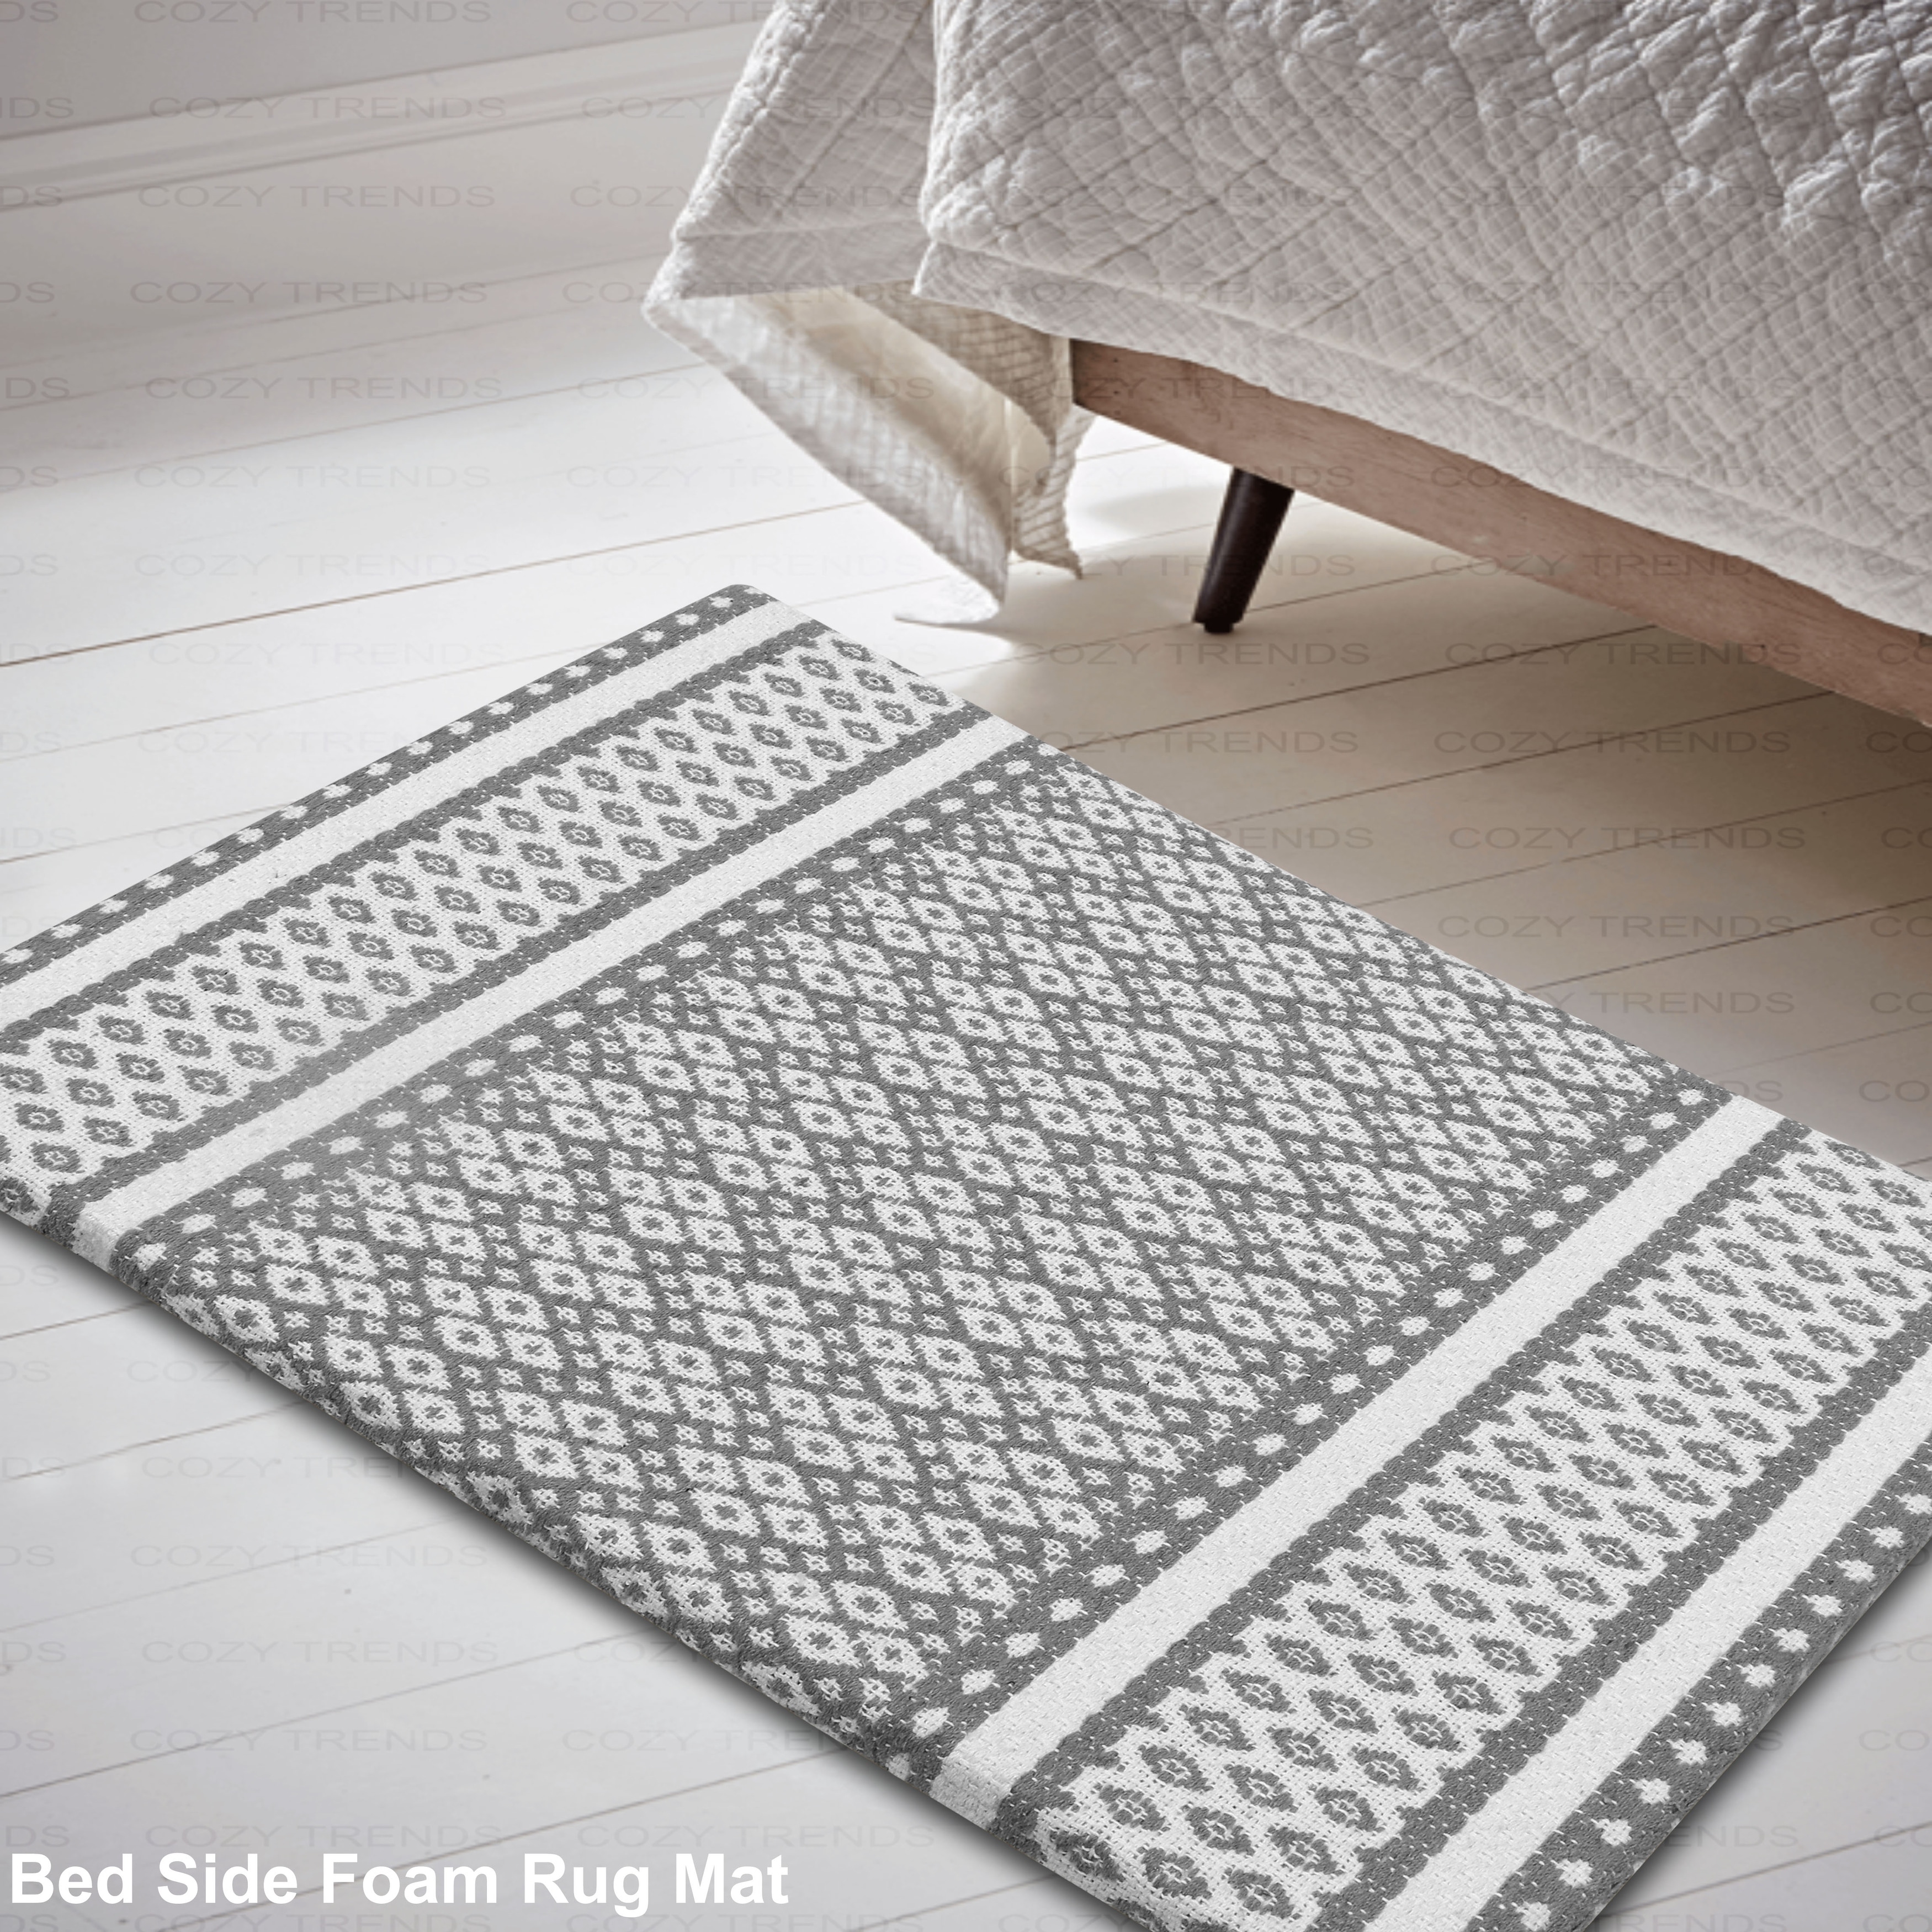 https://ak1.ostkcdn.com/images/products/is/images/direct/317bb6cee462dbf8fcb78843efefc32323cc5db3/Cotton-Kitchen-Mat-Cushioned-Anti-Fatigue-Rug%2C-Non-Slip-Mats-Comfort-Foam-Rug-for-Kitchen%2C-Office%2C-Sink%2C-Laundry---18%27%27x30%27%27.jpg